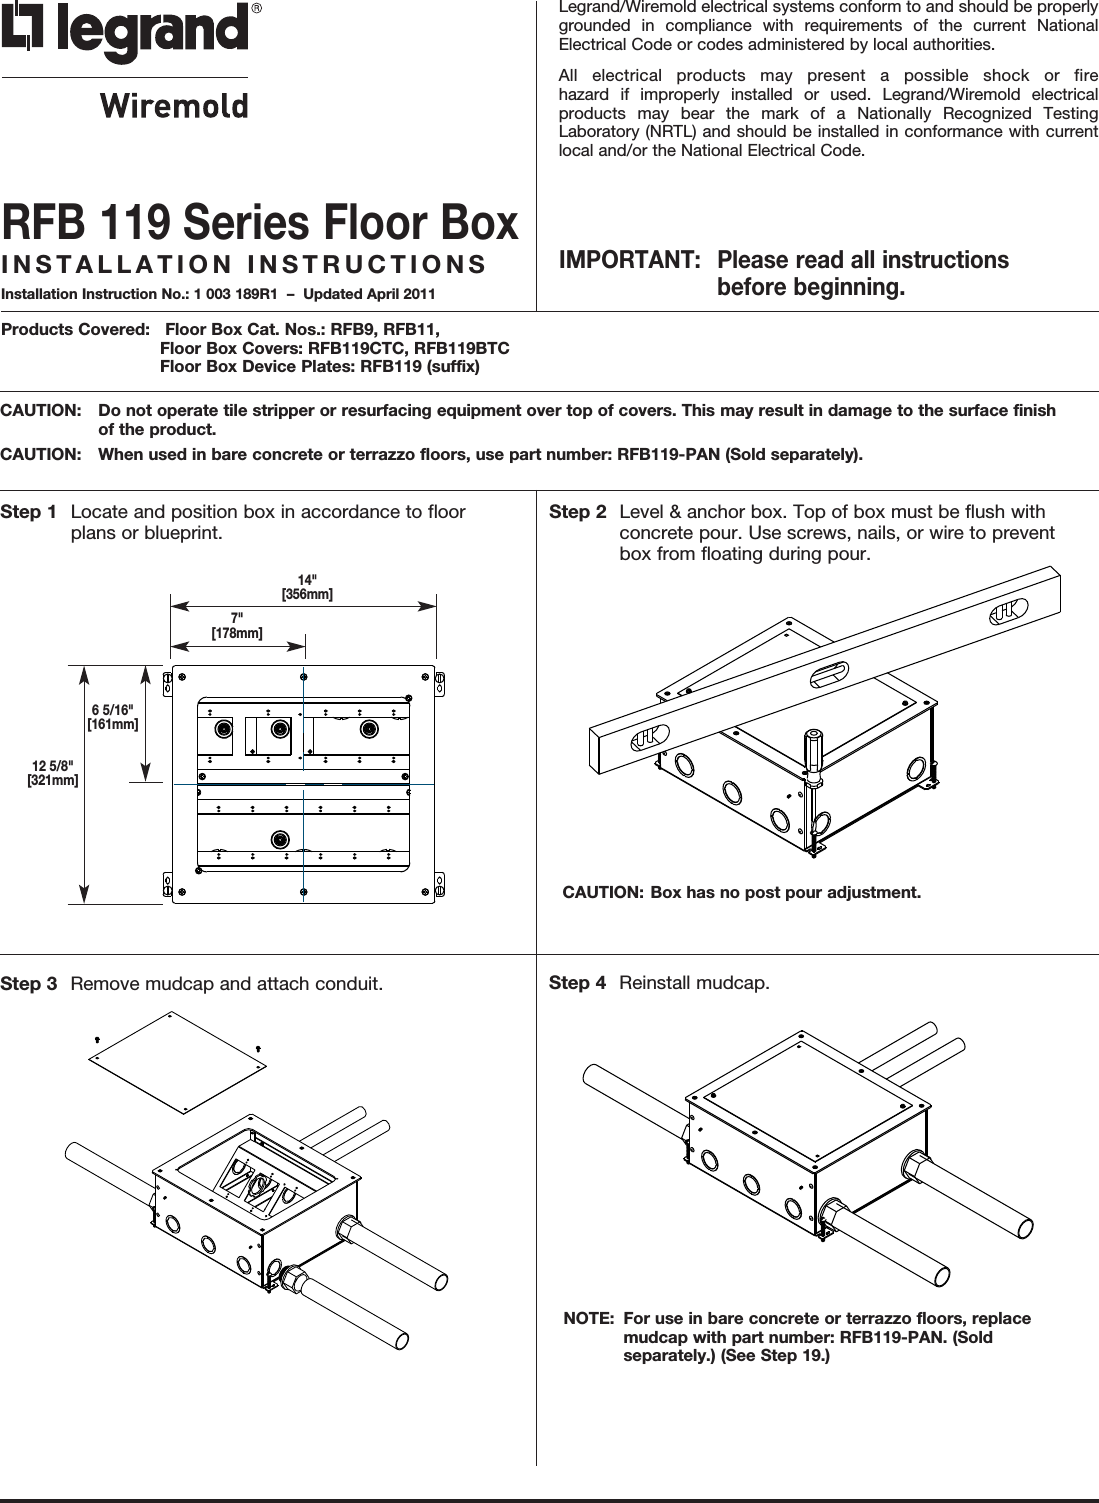 Page 1 of 8 - RFB119 Series Floor Box Installation Instructions  Directions